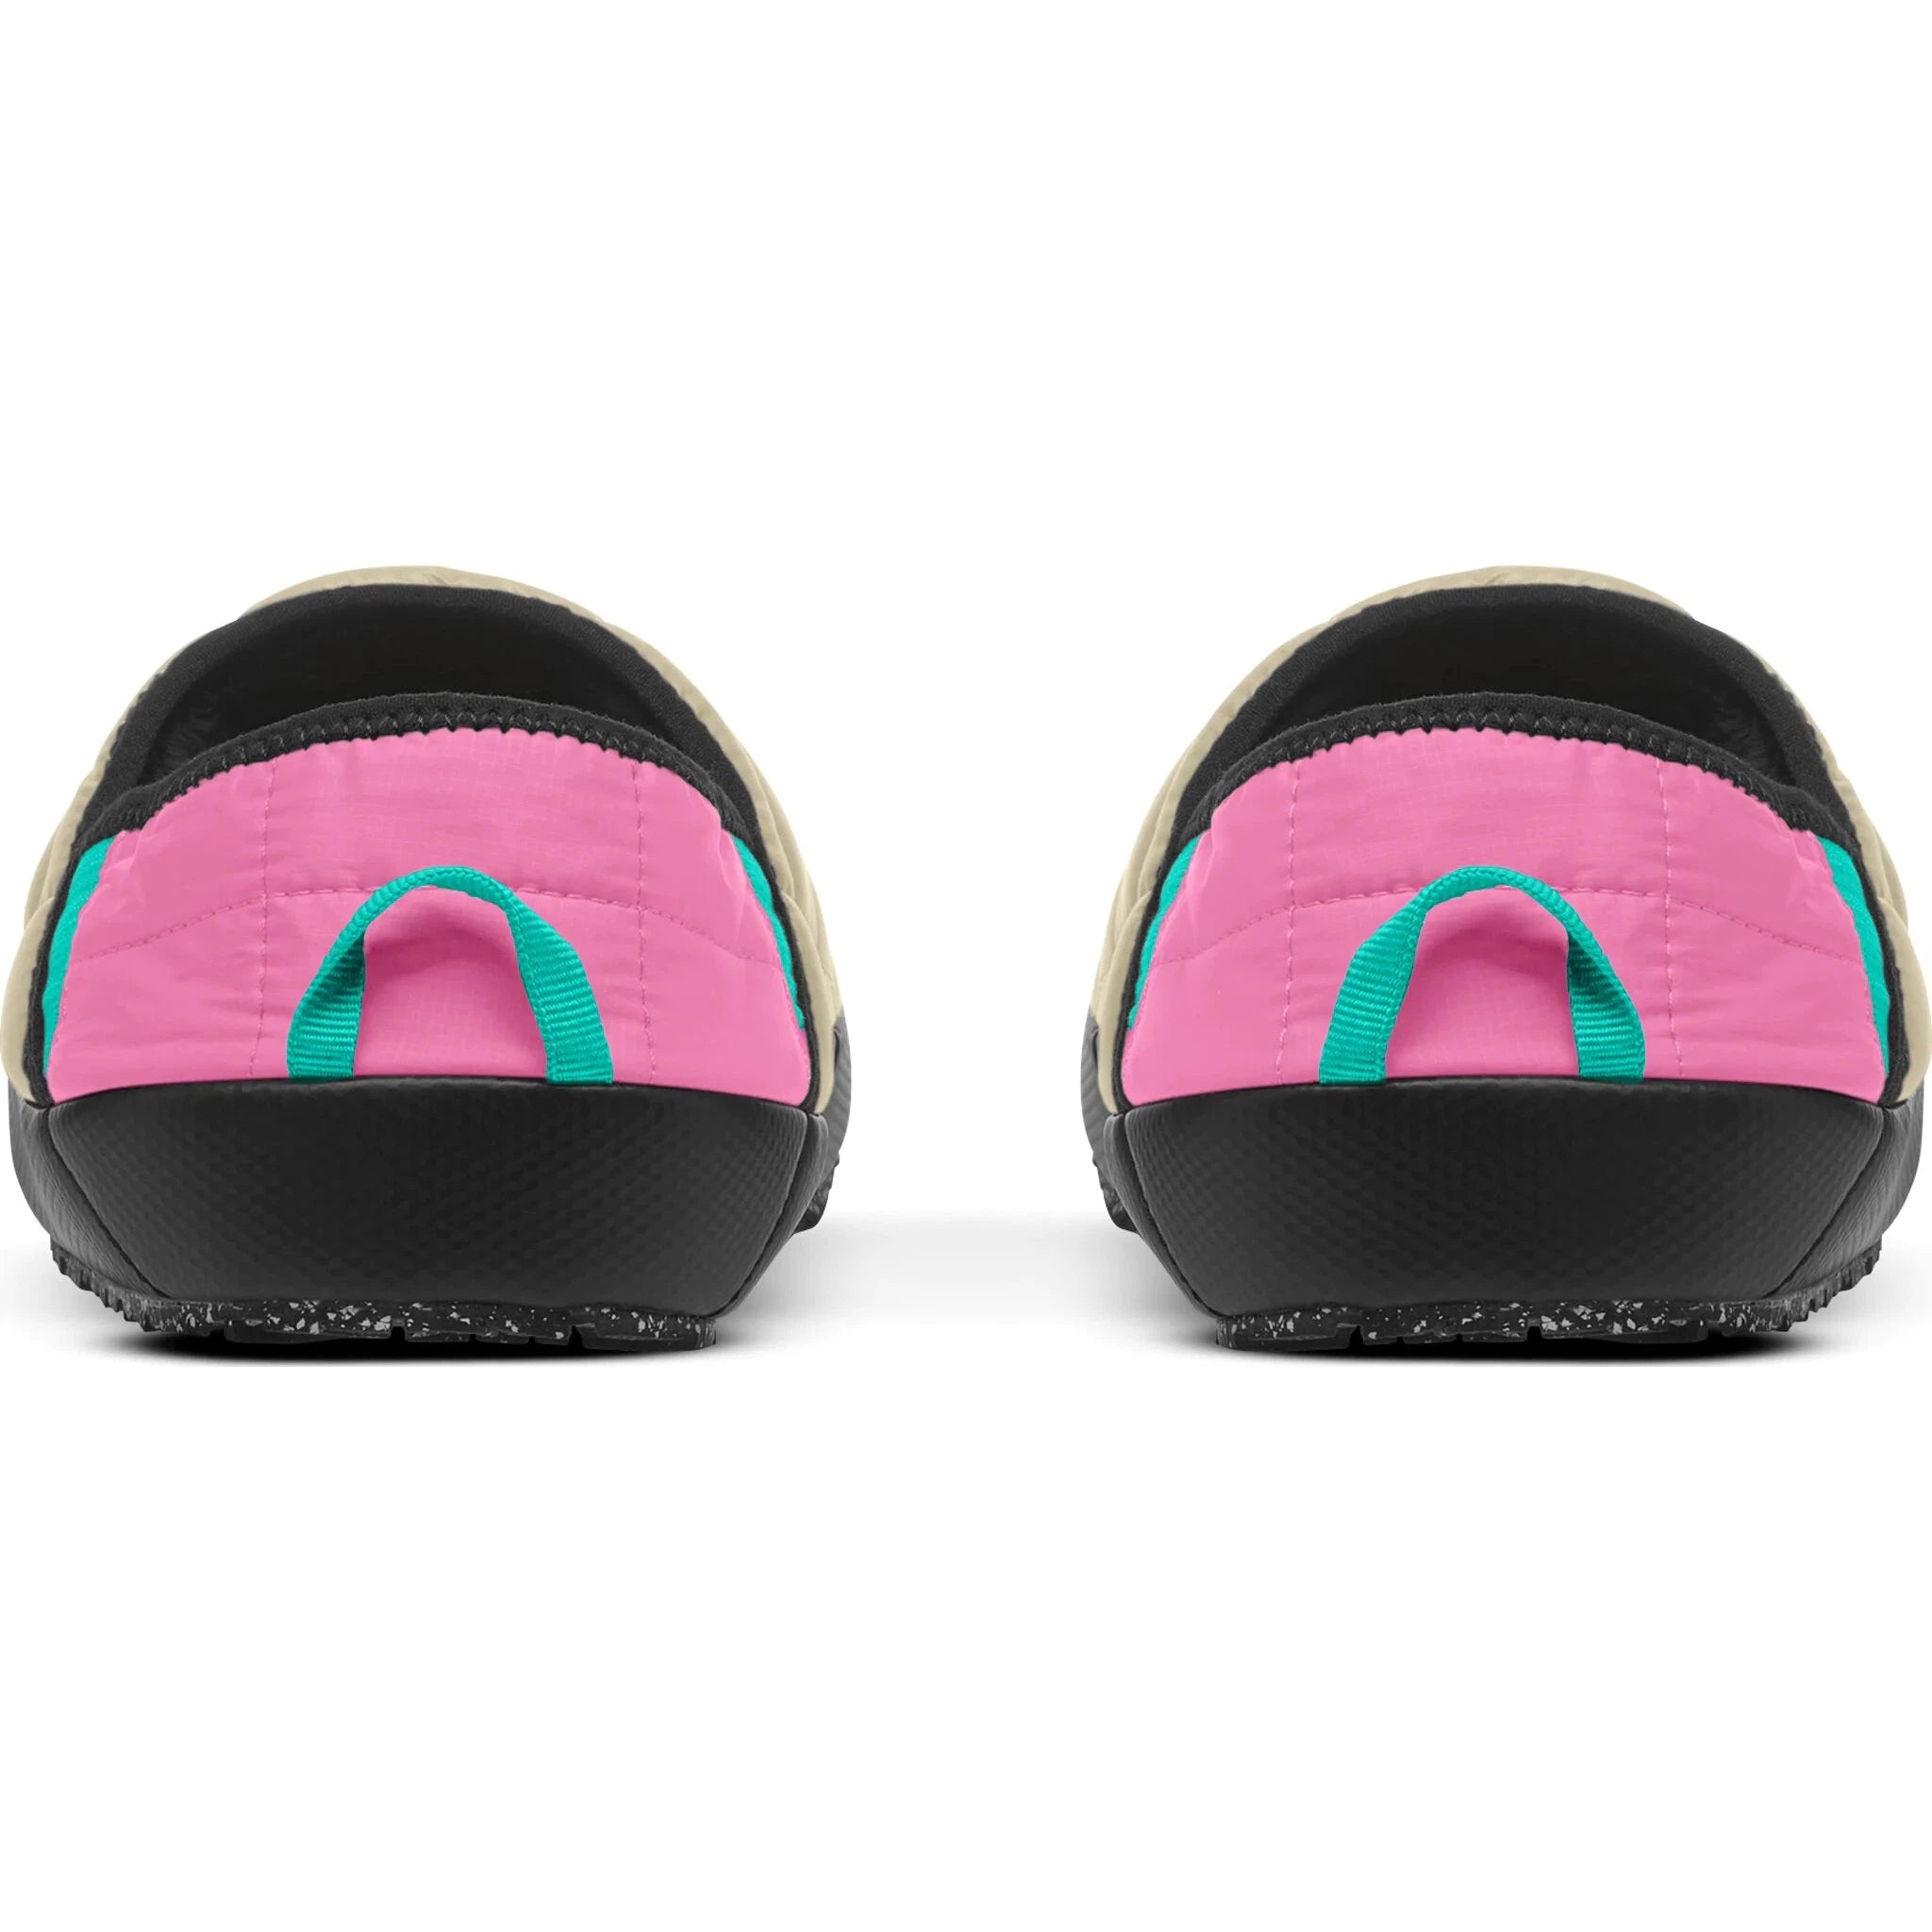 TNF Women’s ThermoBall Traction Mules V Slippers